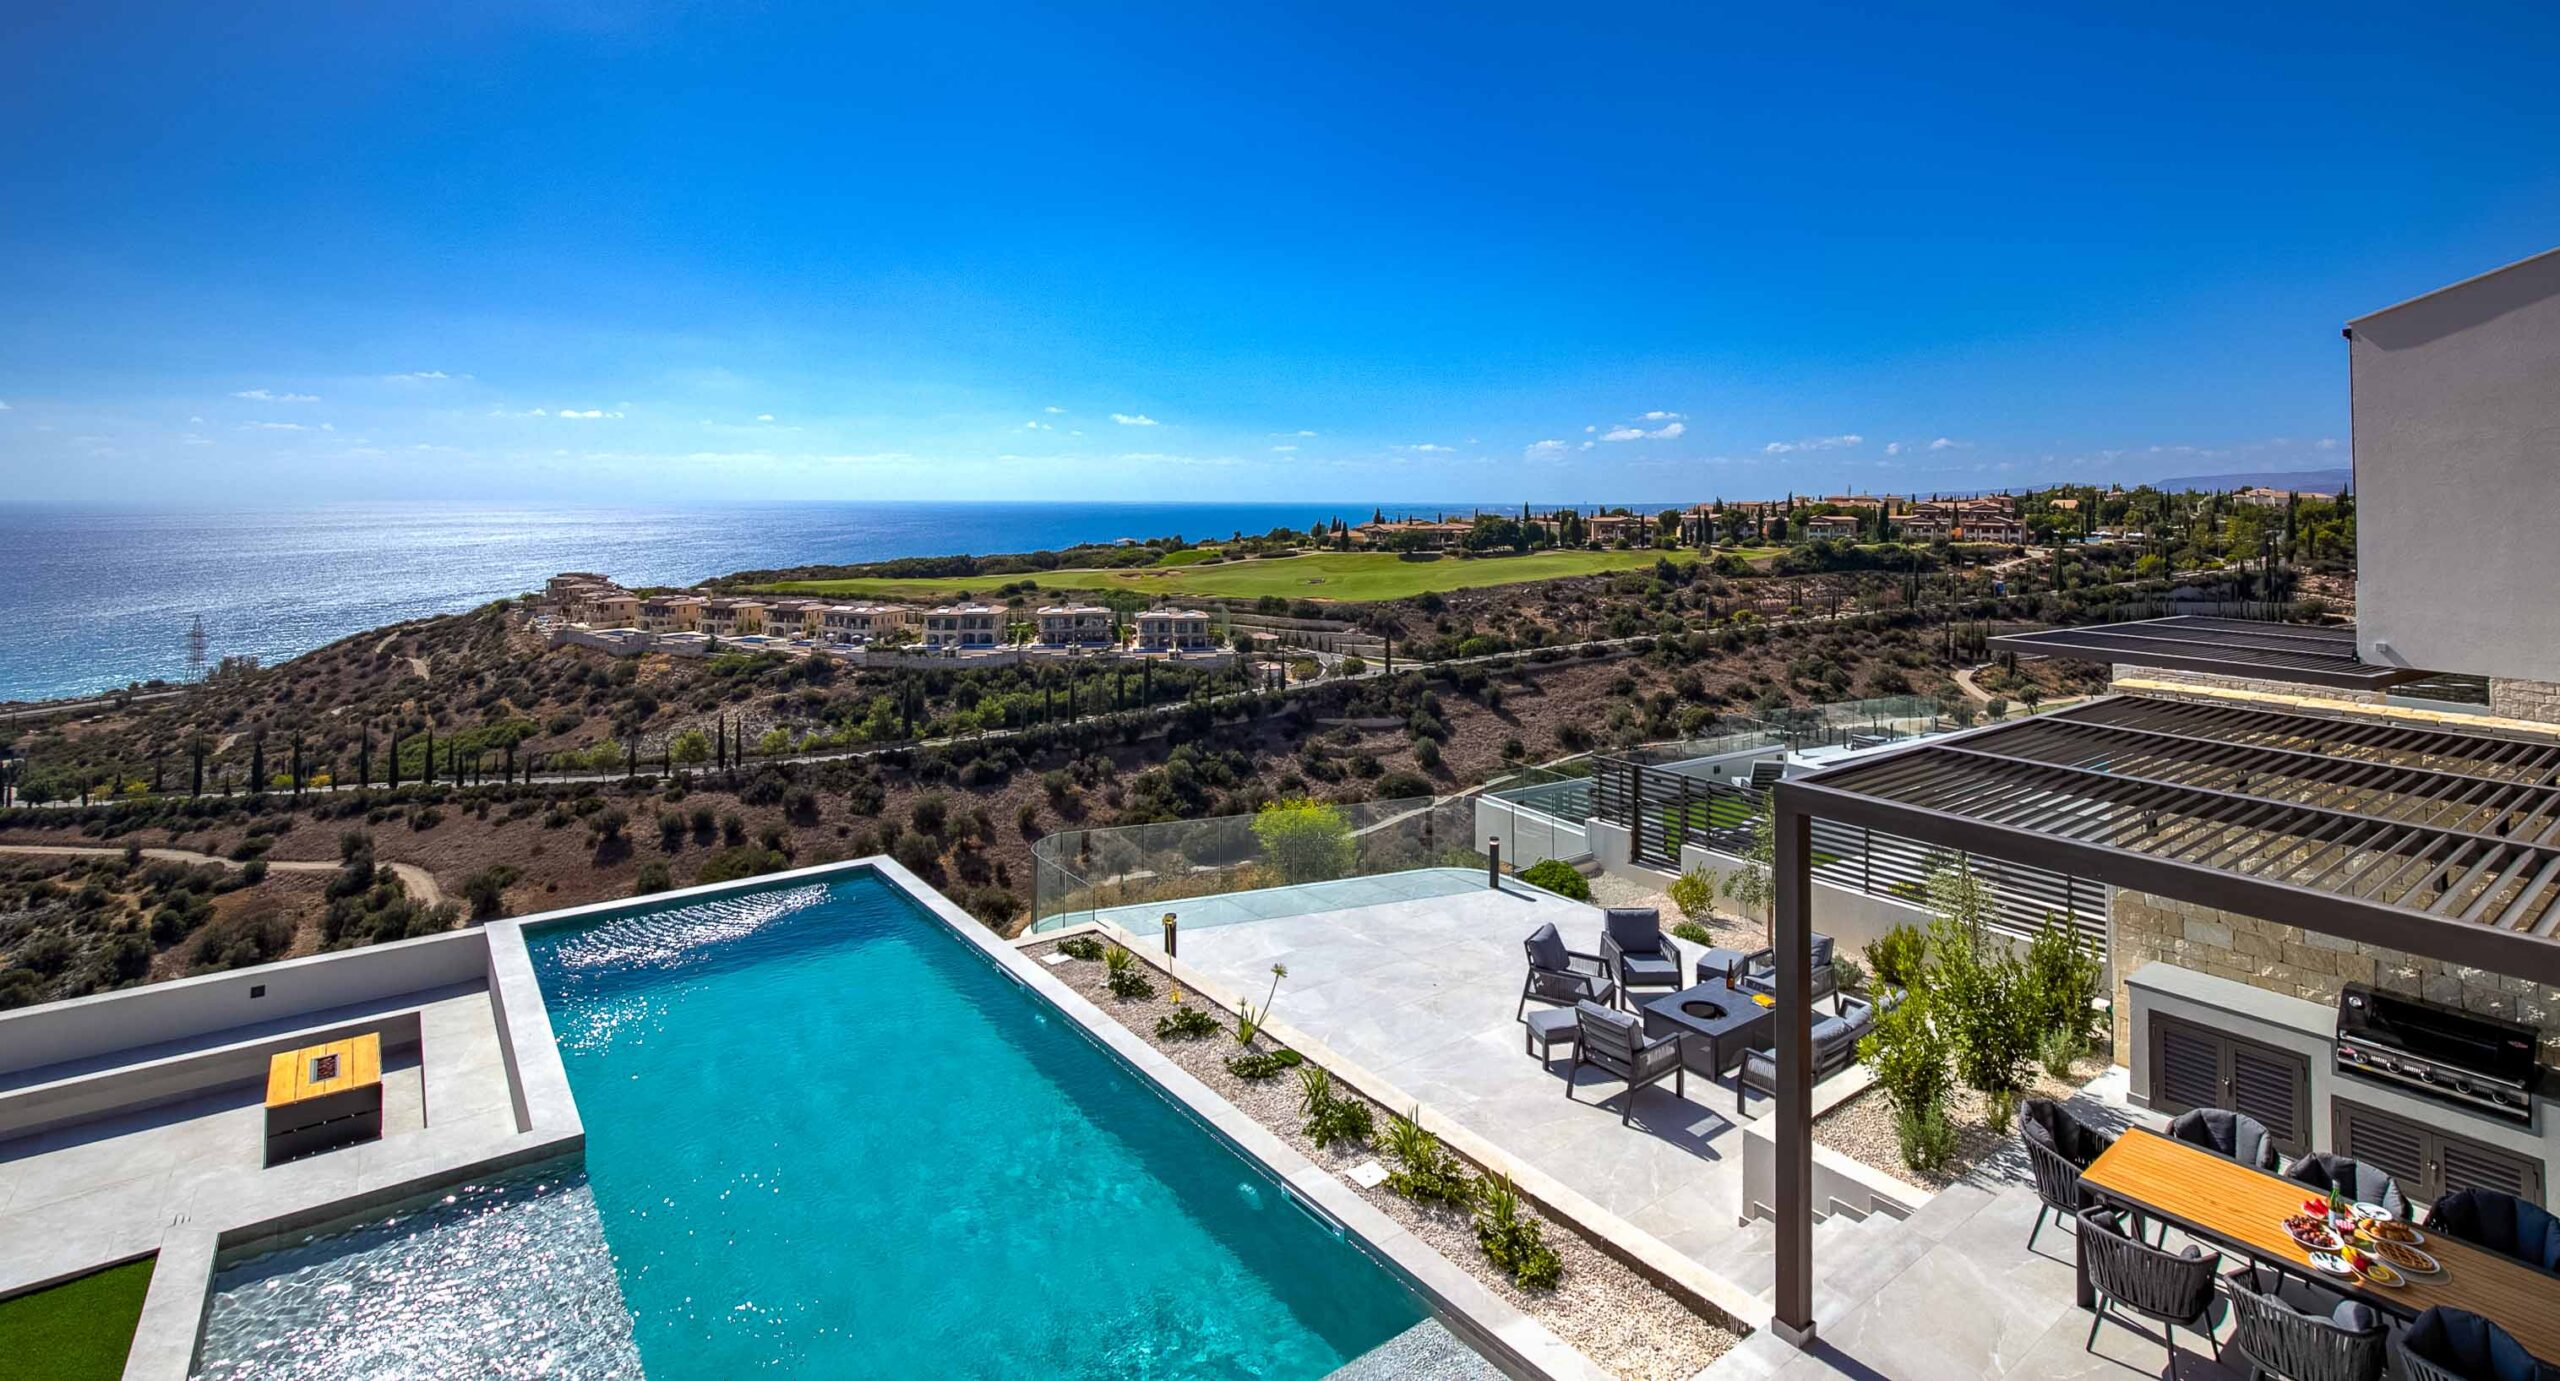 Photo of Villa 286 on Aphrodite Hills - View from upper balcony overlooking terrace and pool out to the golf course and sea beyond.